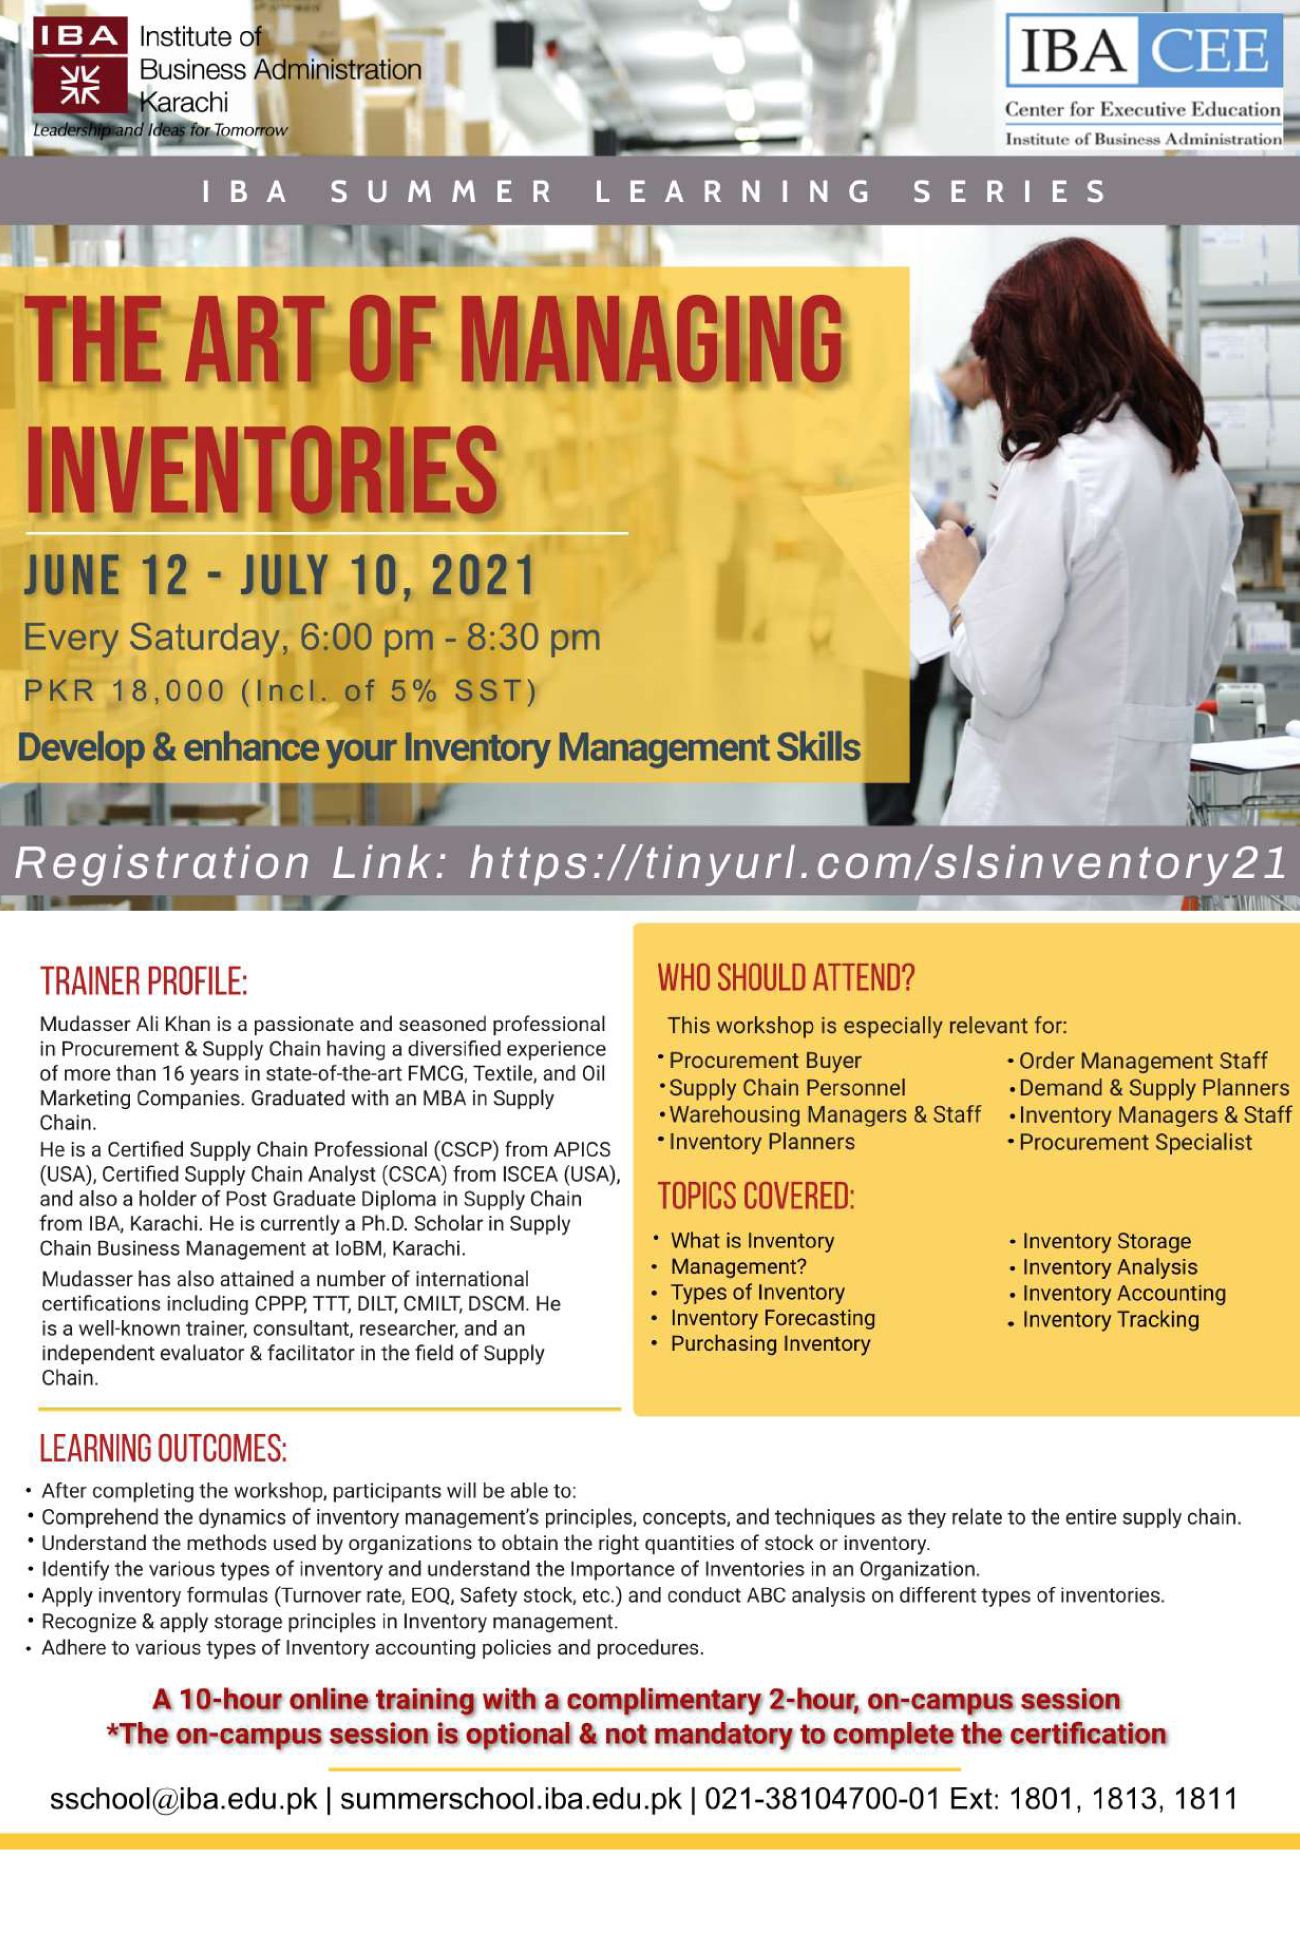 The Art of Managing Inventories